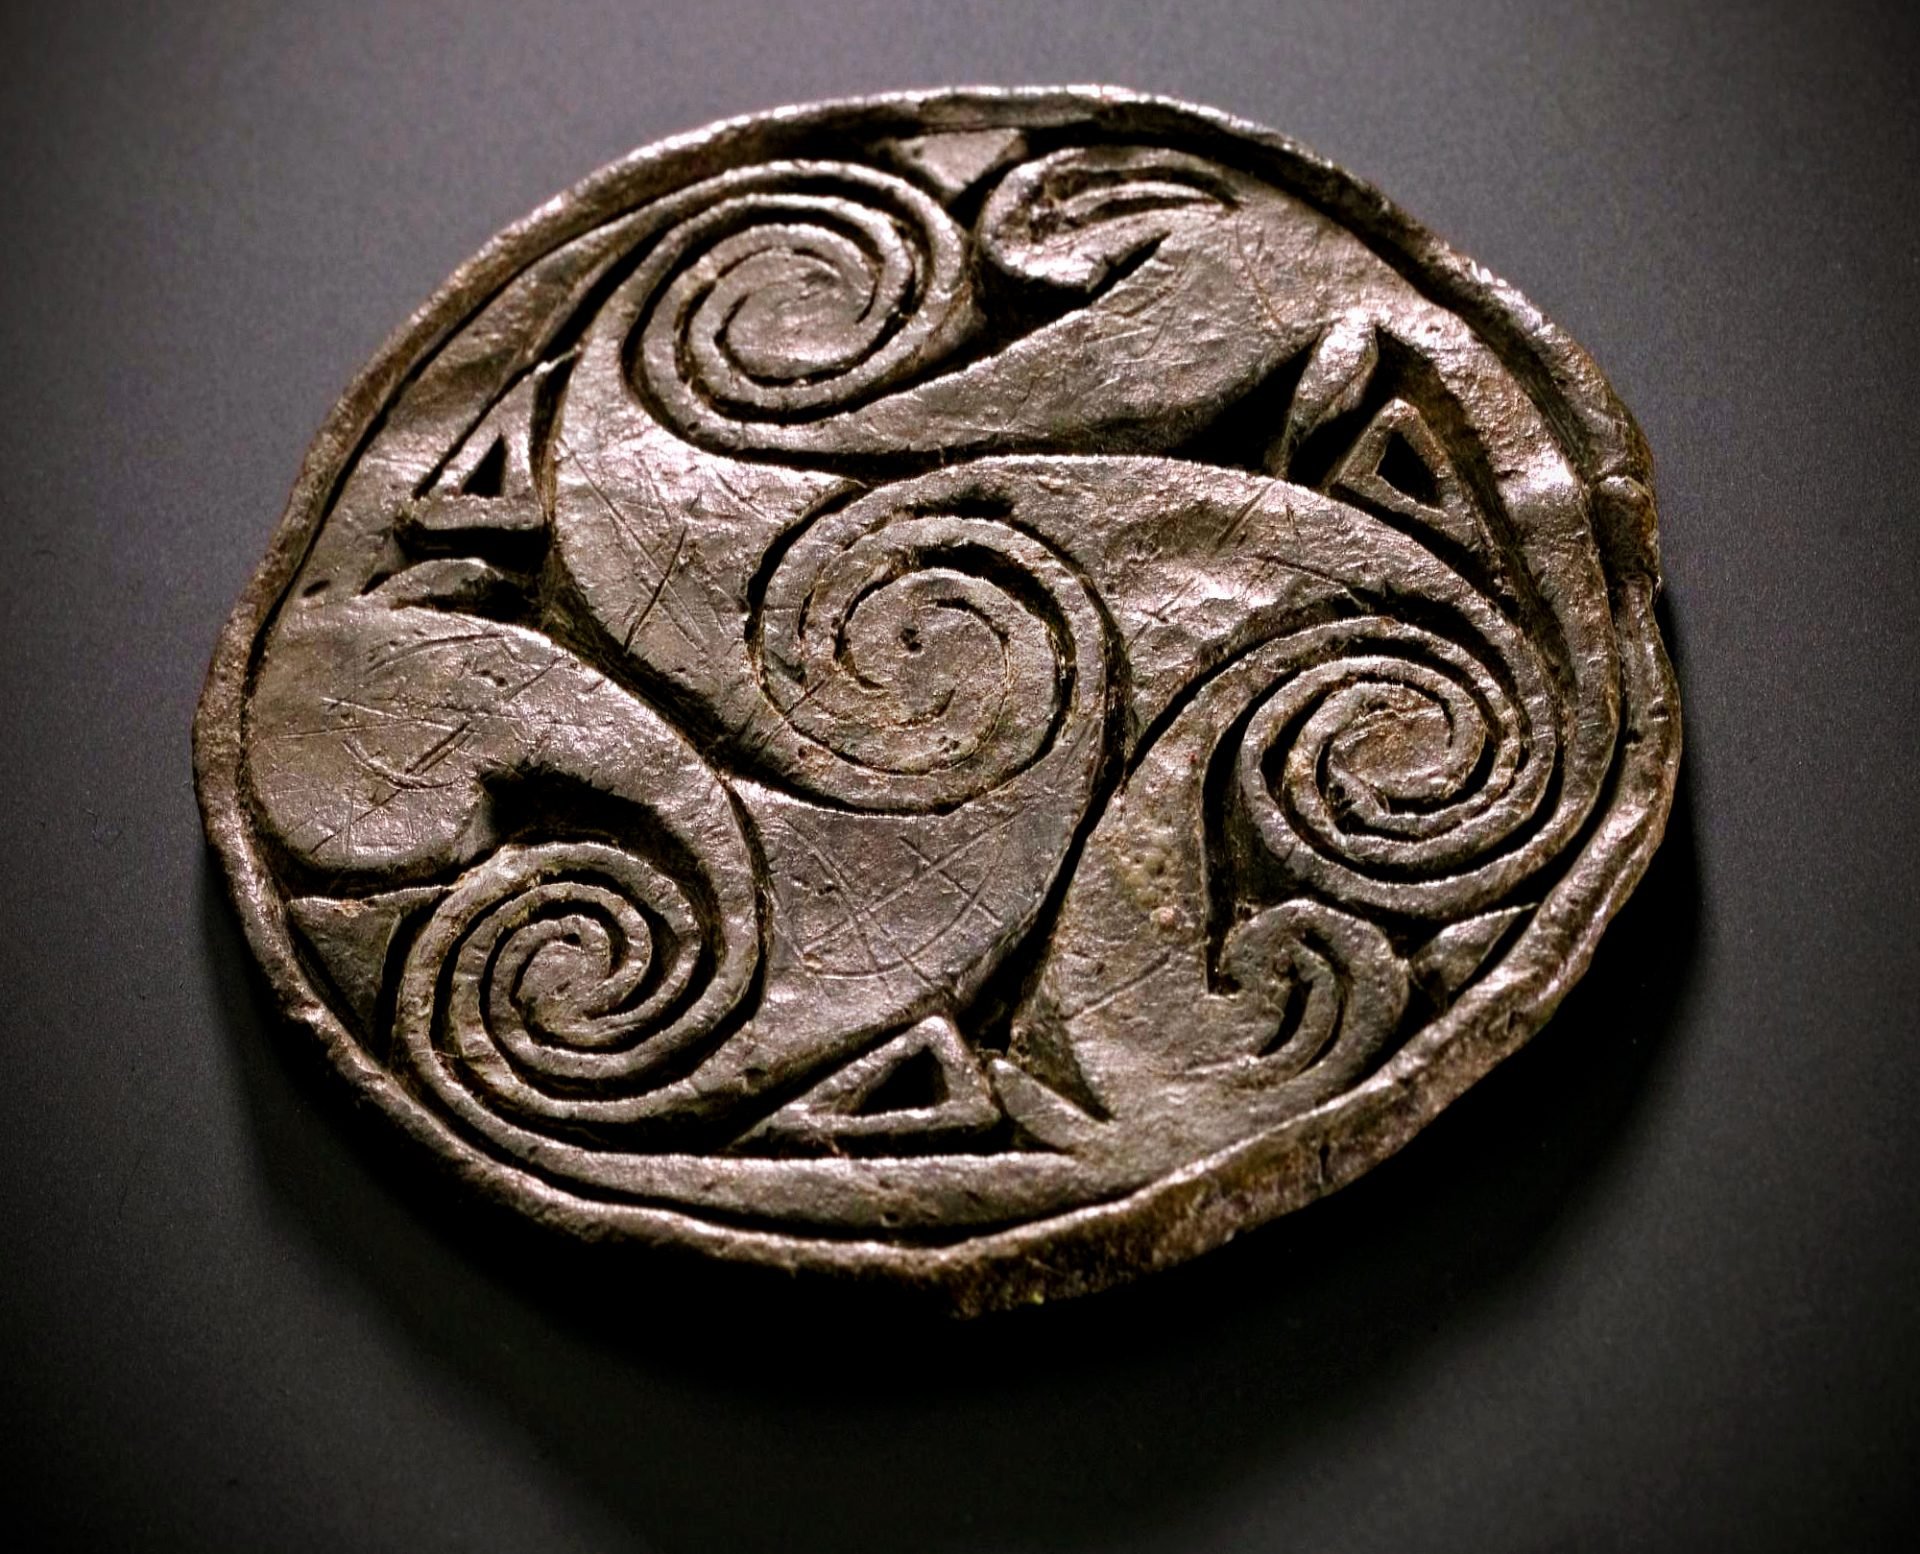 Pictish lead disc on a black background from the Brough of Birsay, Orkney, dated 700 - 900 AD, engraved with a Triskelion pattern and spirals.